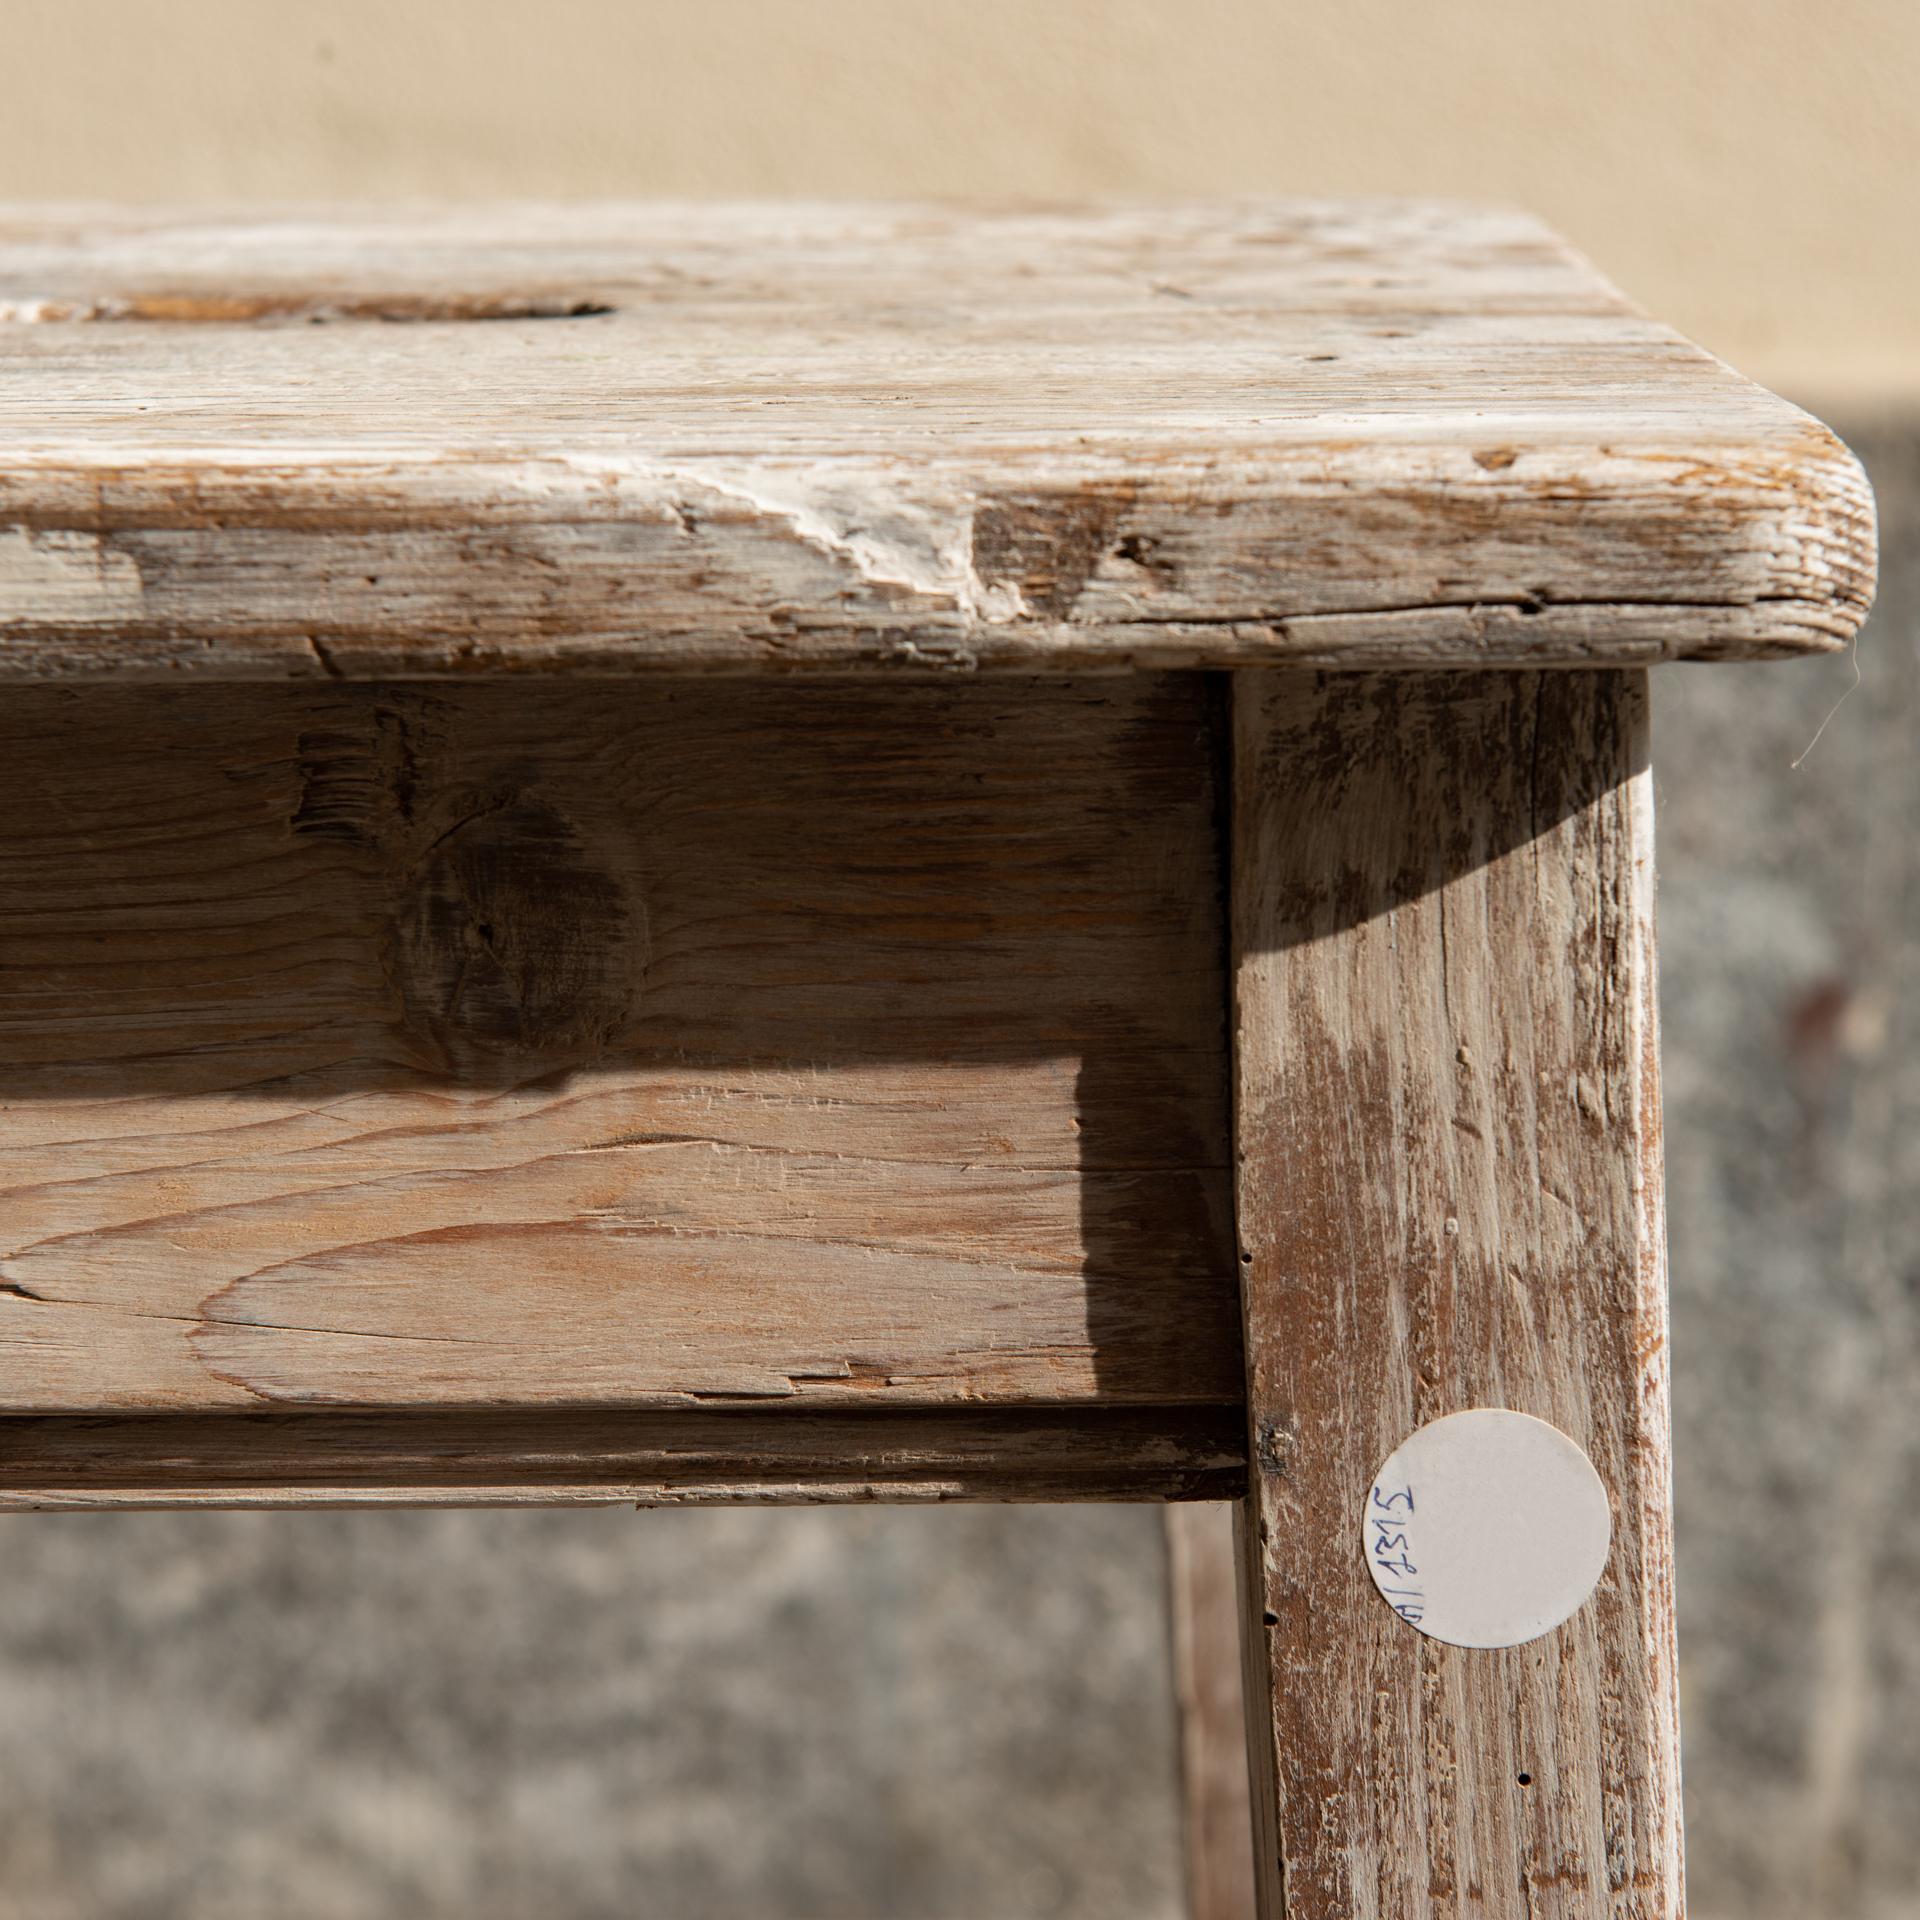 Hand-Crafted Italian Simple Wooden Stool For Sale